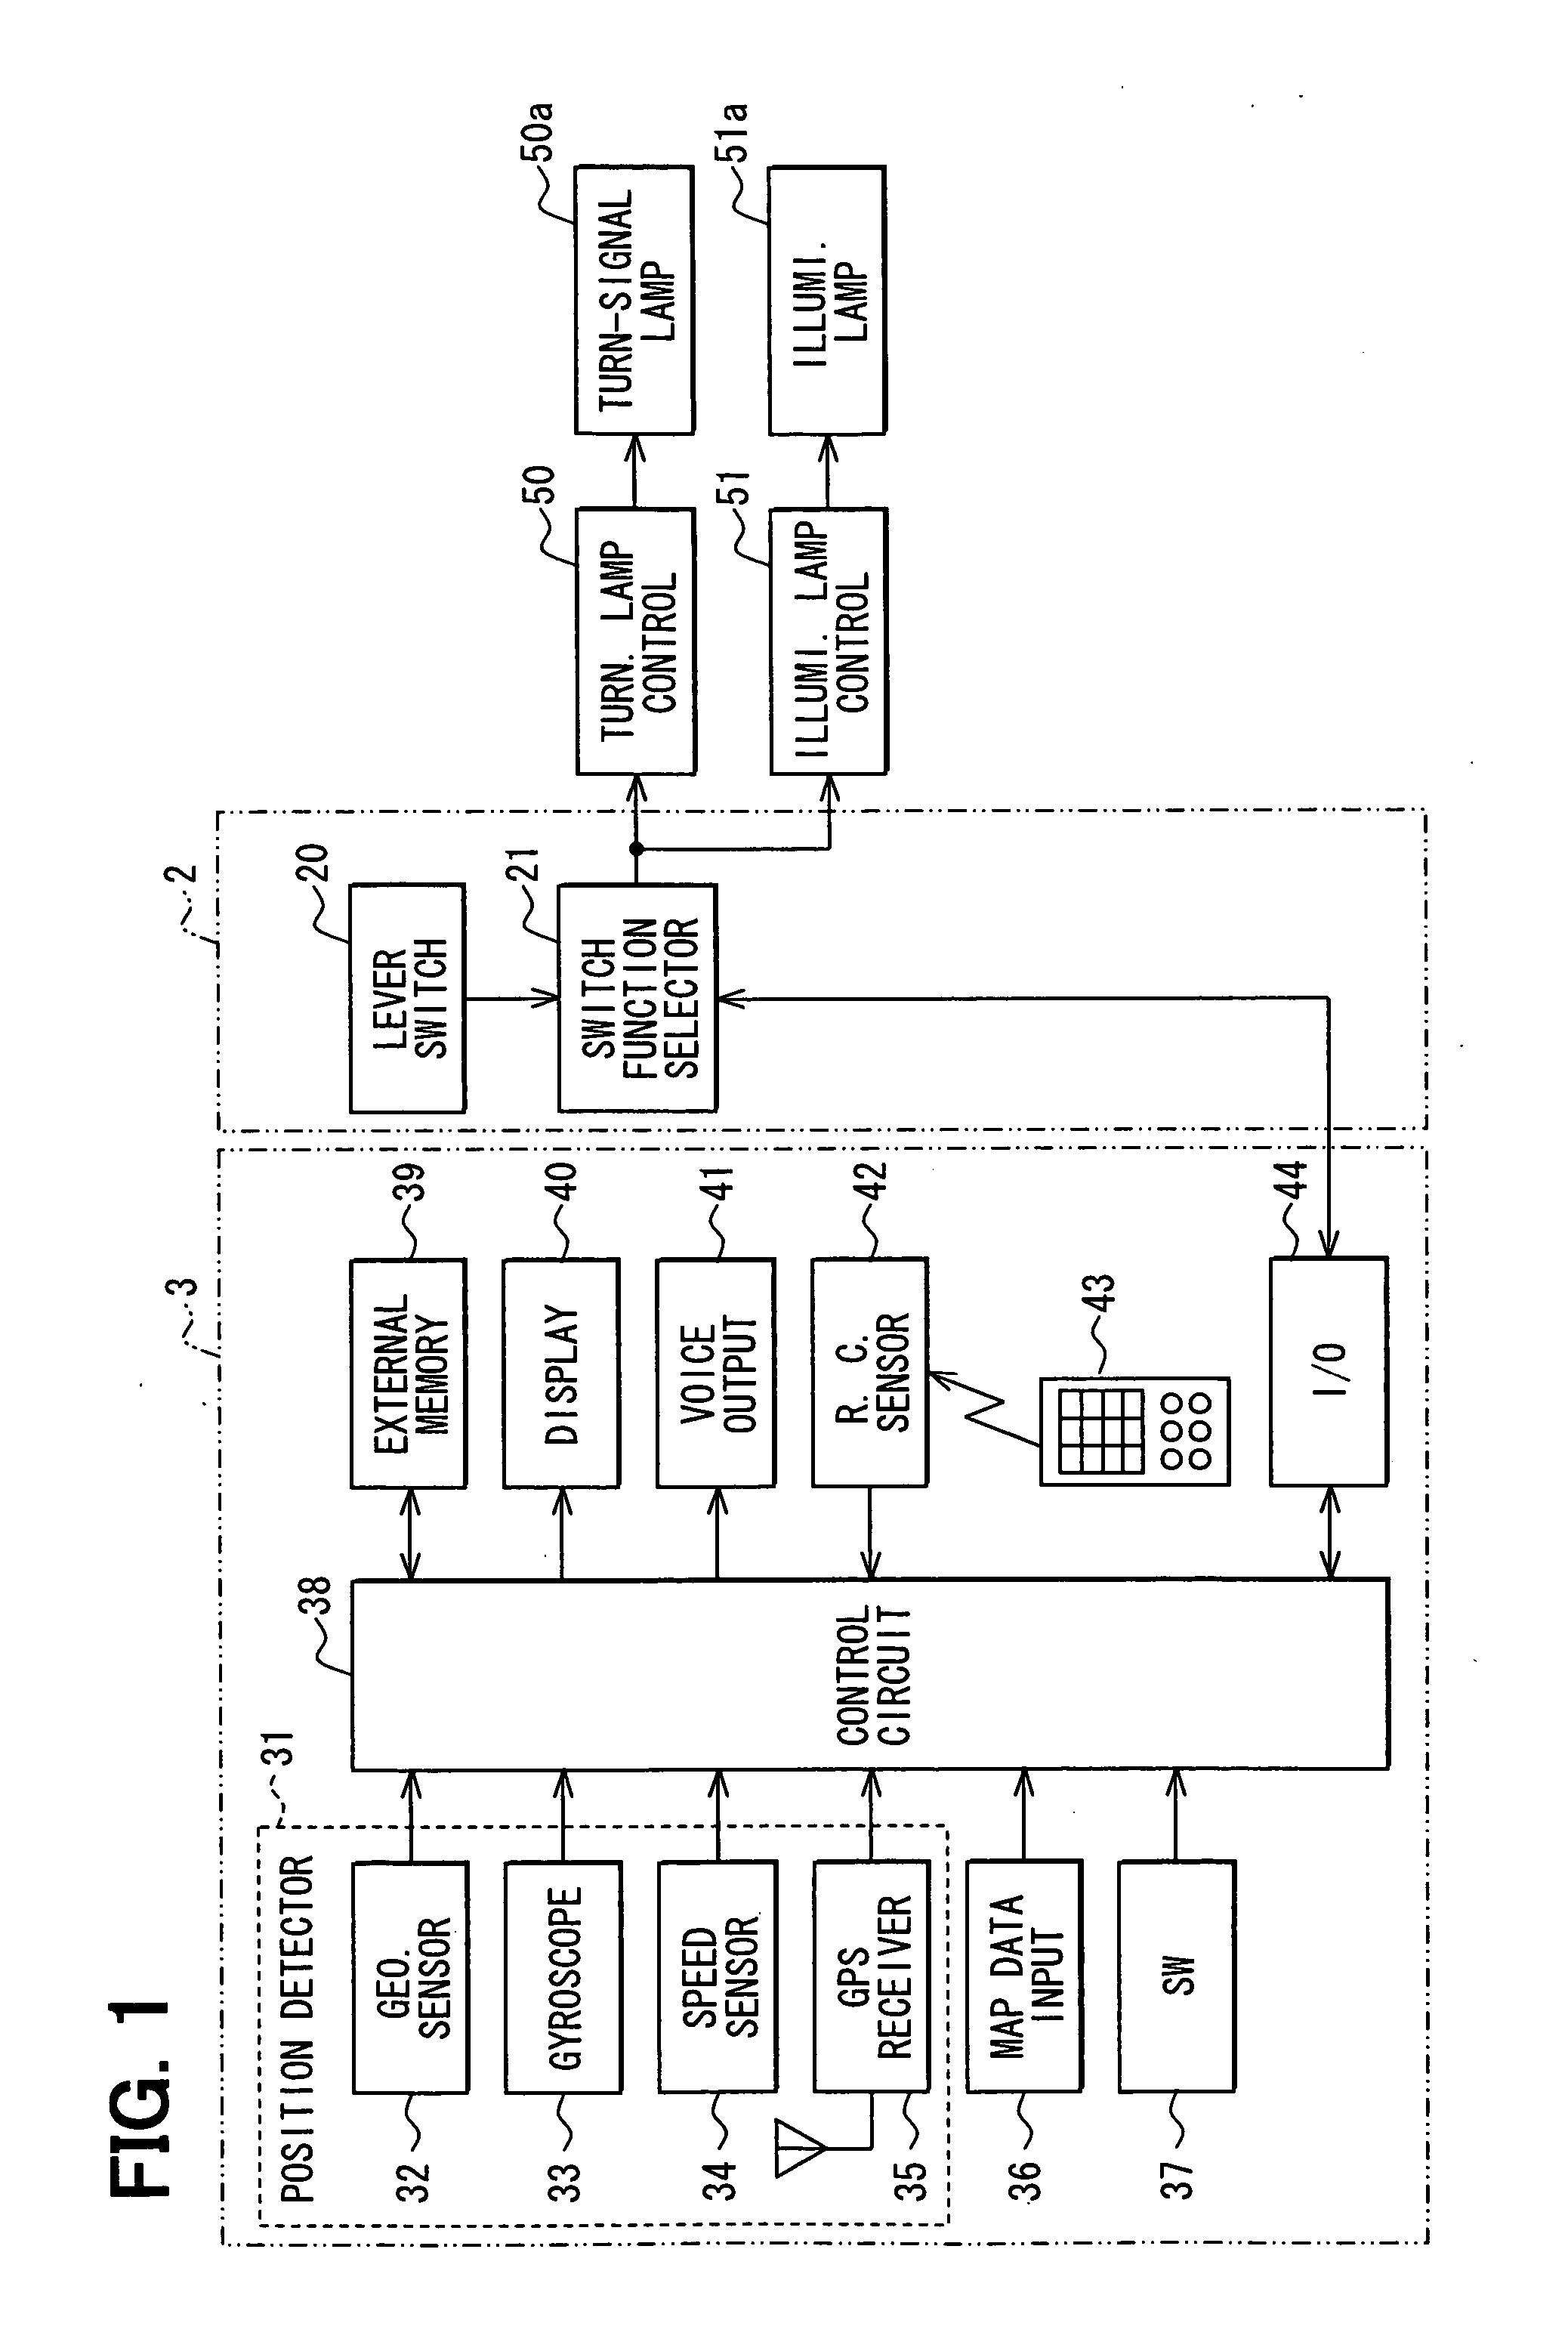 Operating device and in-vehicle electronic device